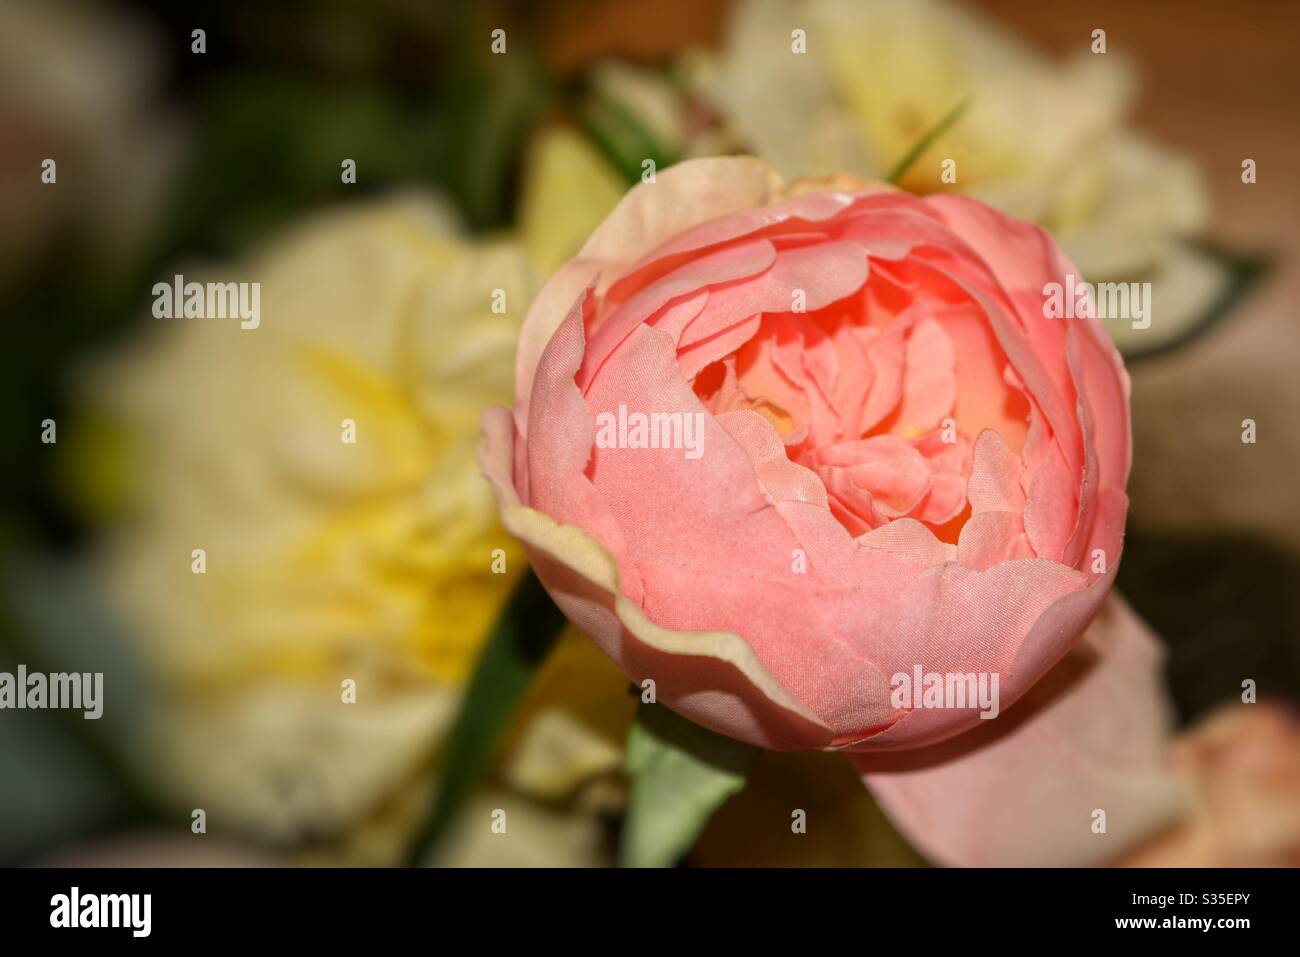 Flower decoration with lens blur Stock Photo